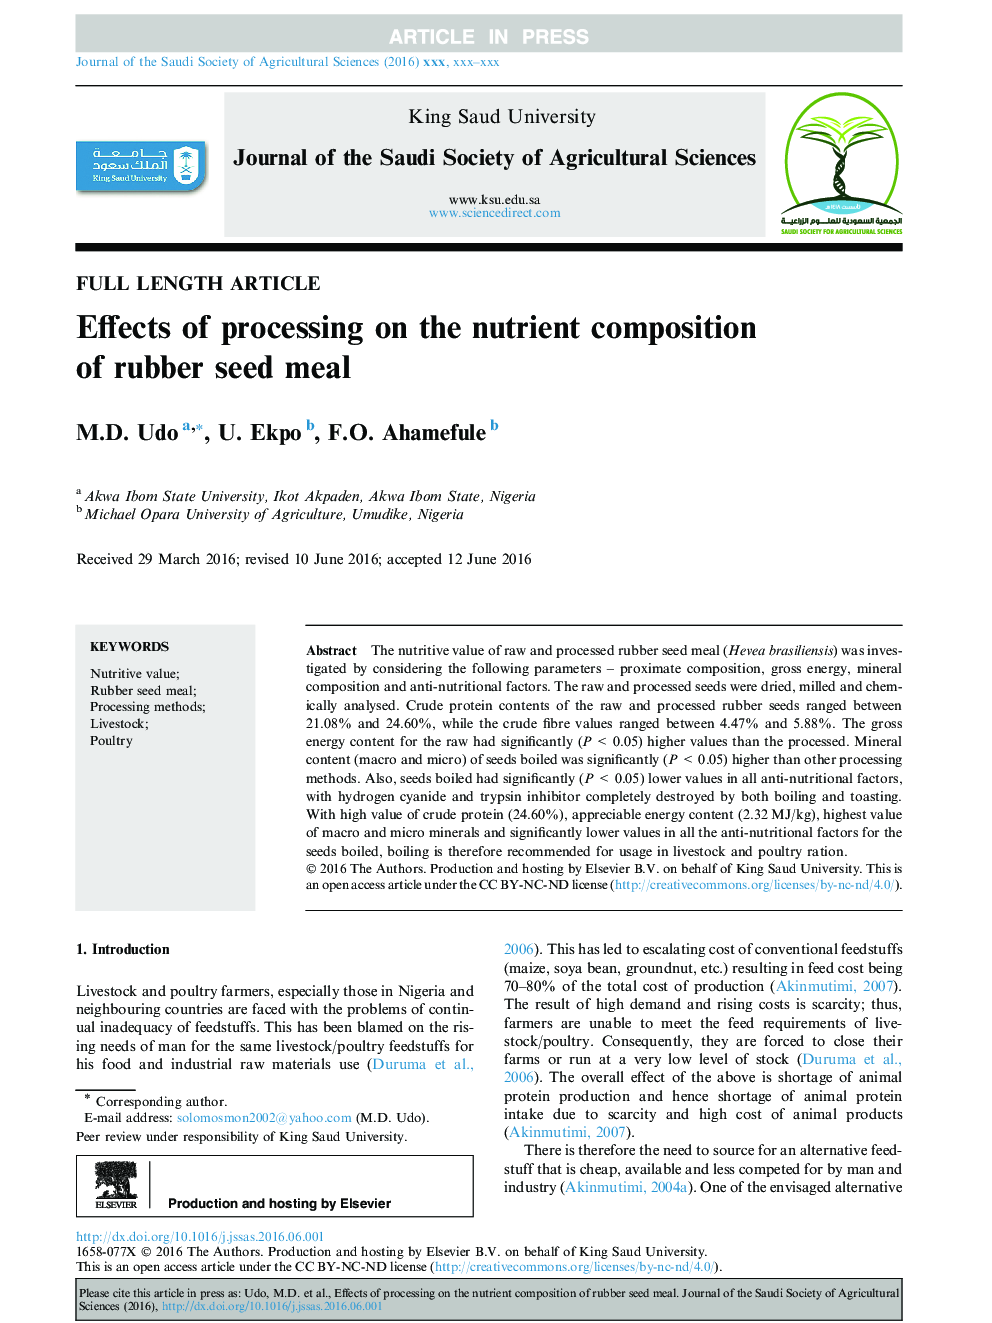 Effects of processing on the nutrient composition of rubber seed meal